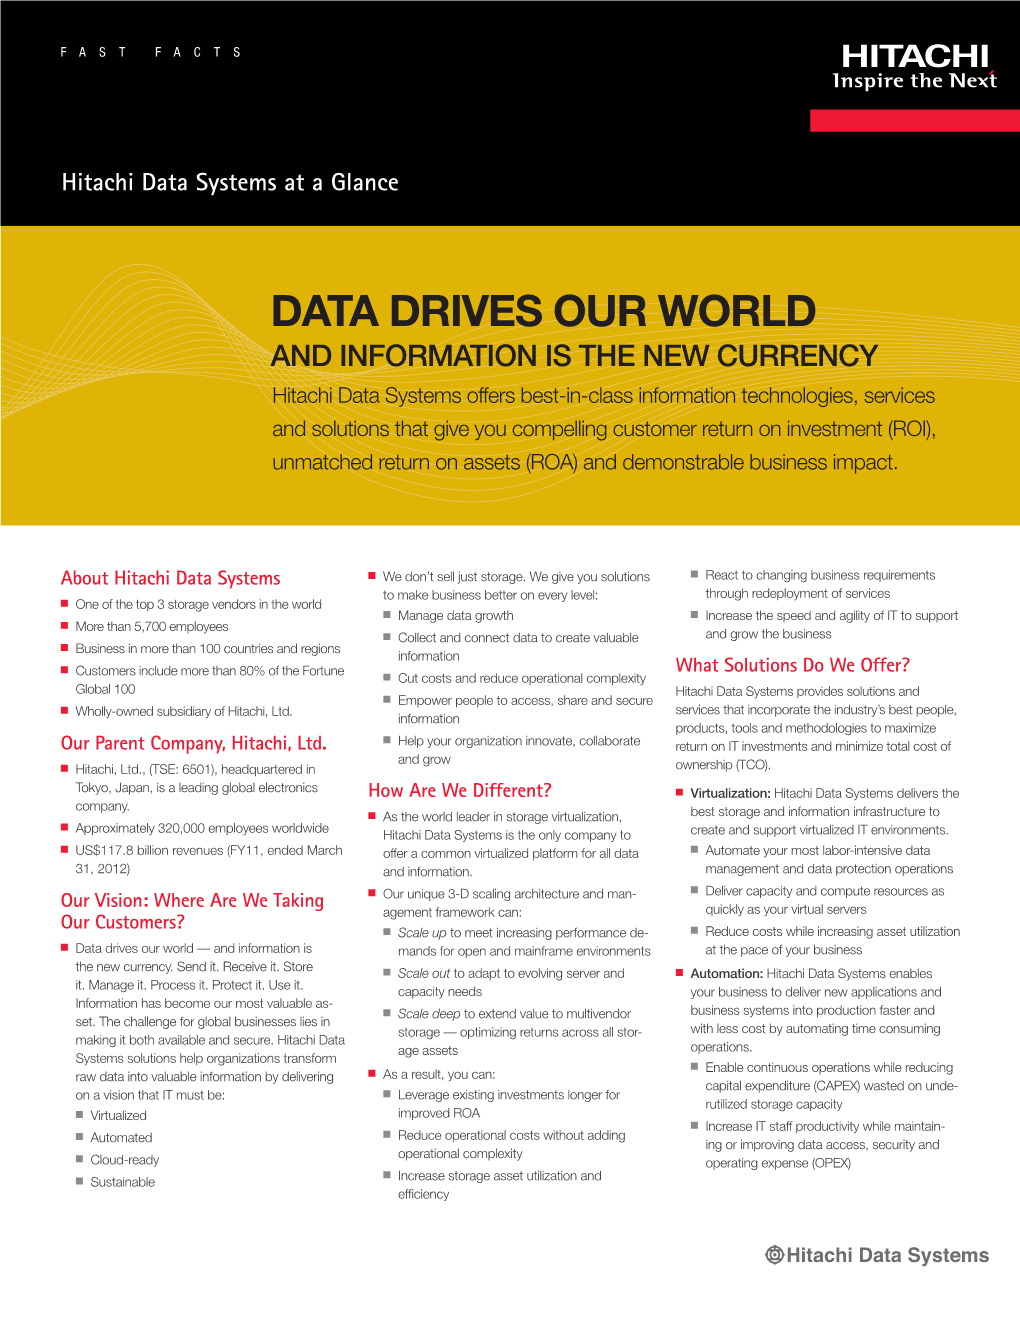 Hitachi Data Systems Fast Facts